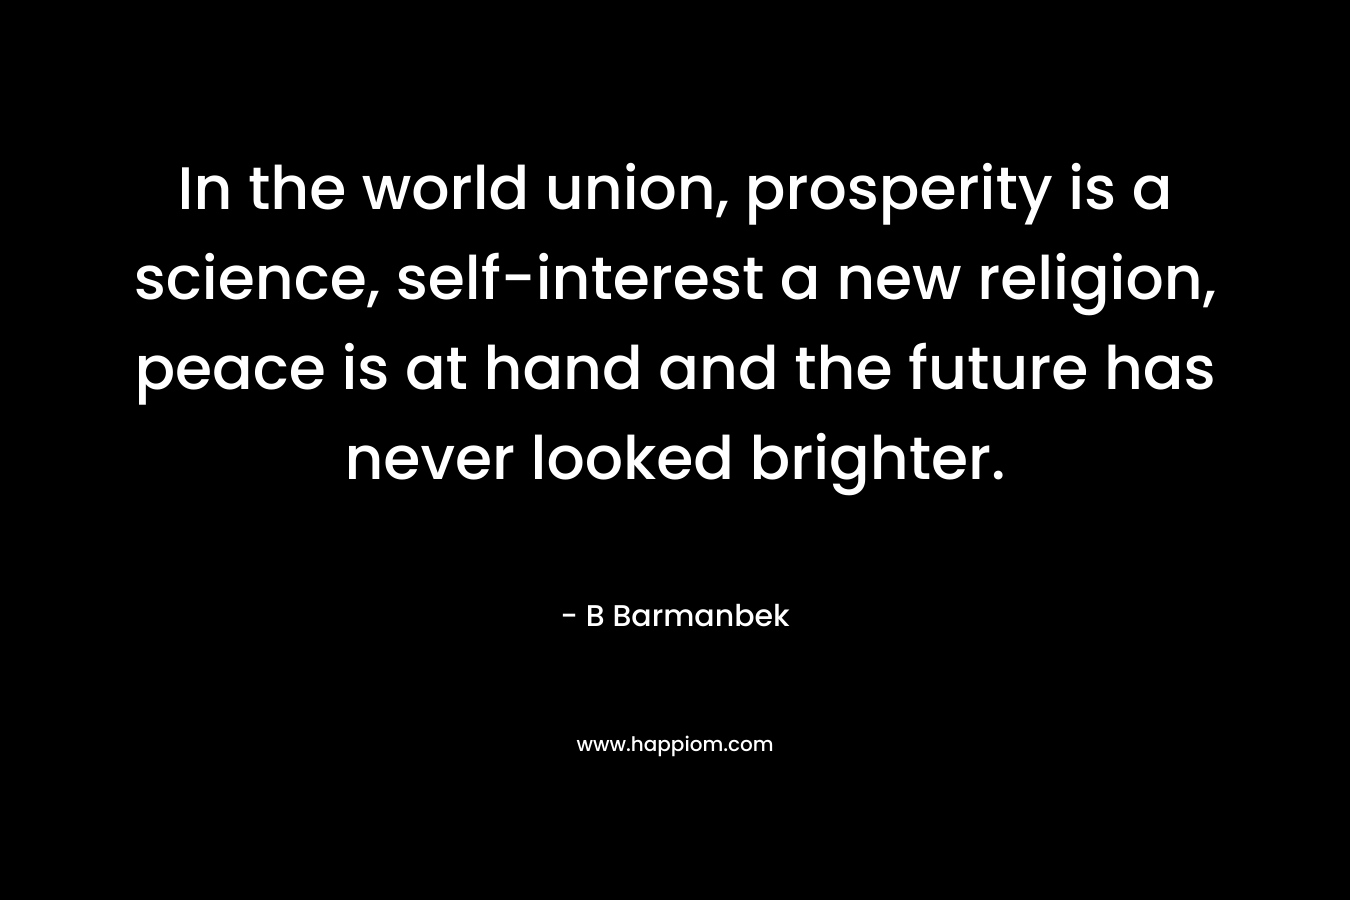 In the world union, prosperity is a science, self-interest a new religion, peace is at hand and the future has never looked brighter.